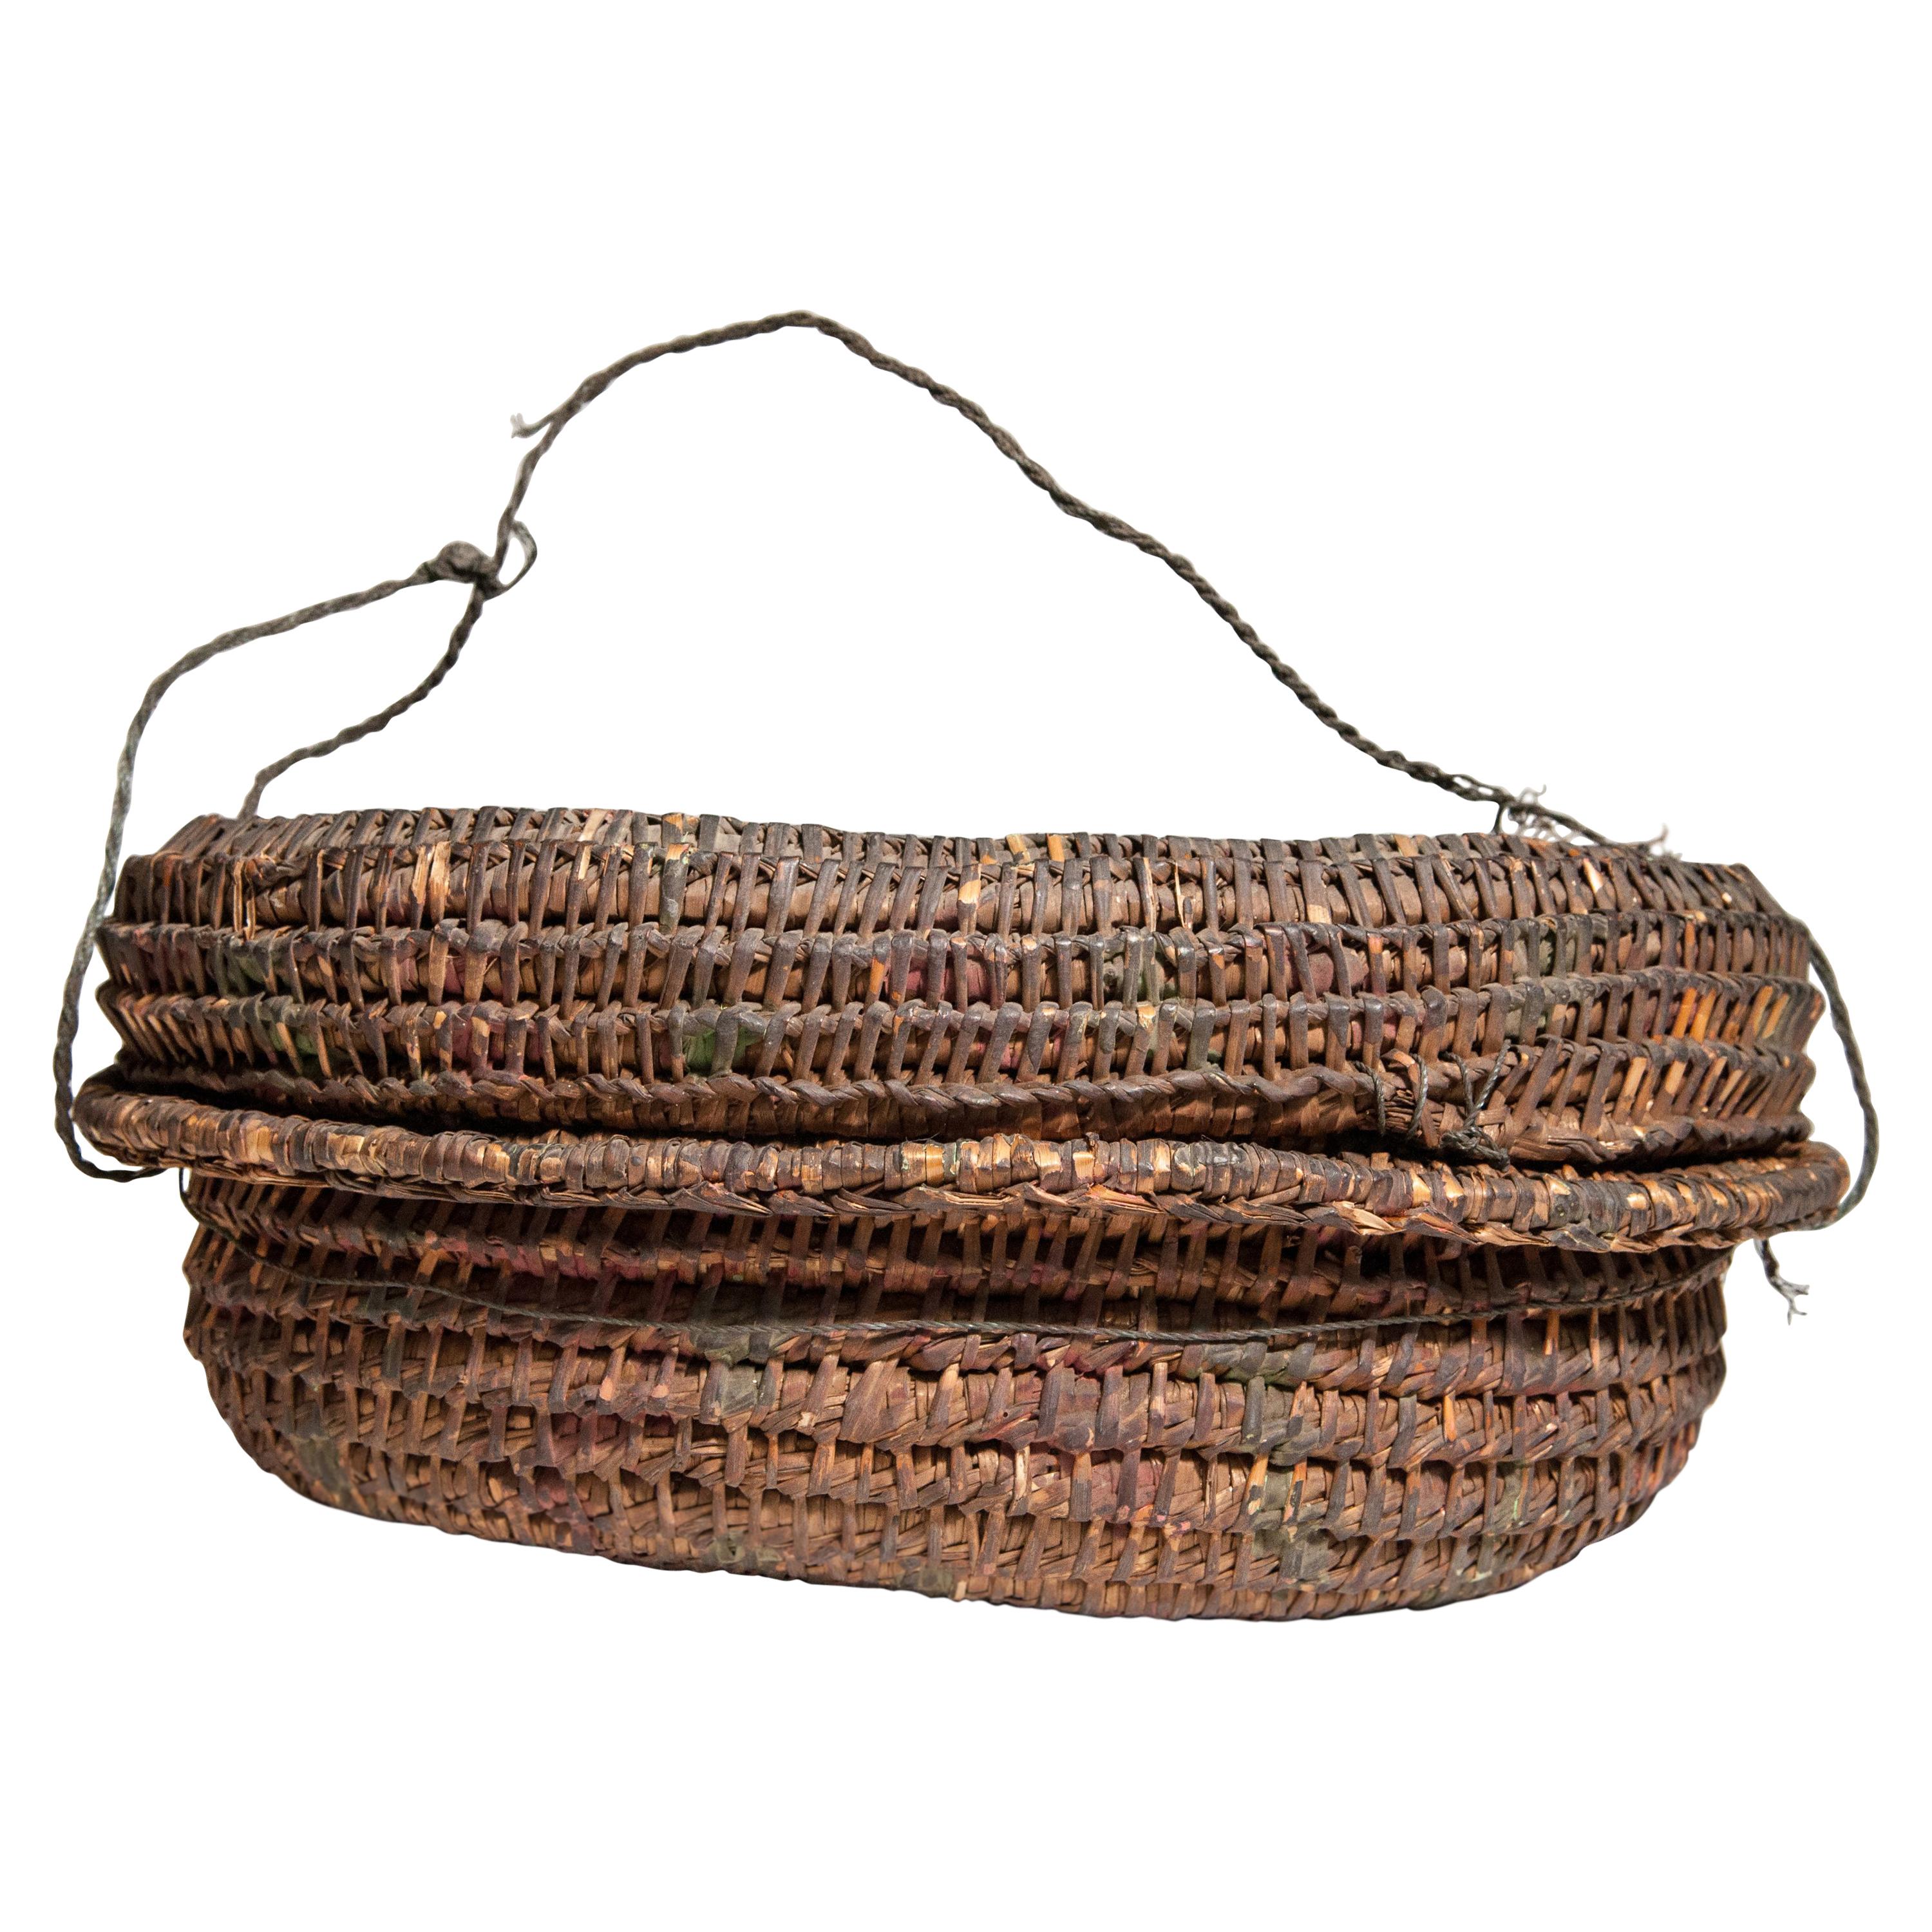 Vintage Rustic Basket Box from the Tharu of Nepal, Mid-20th Century